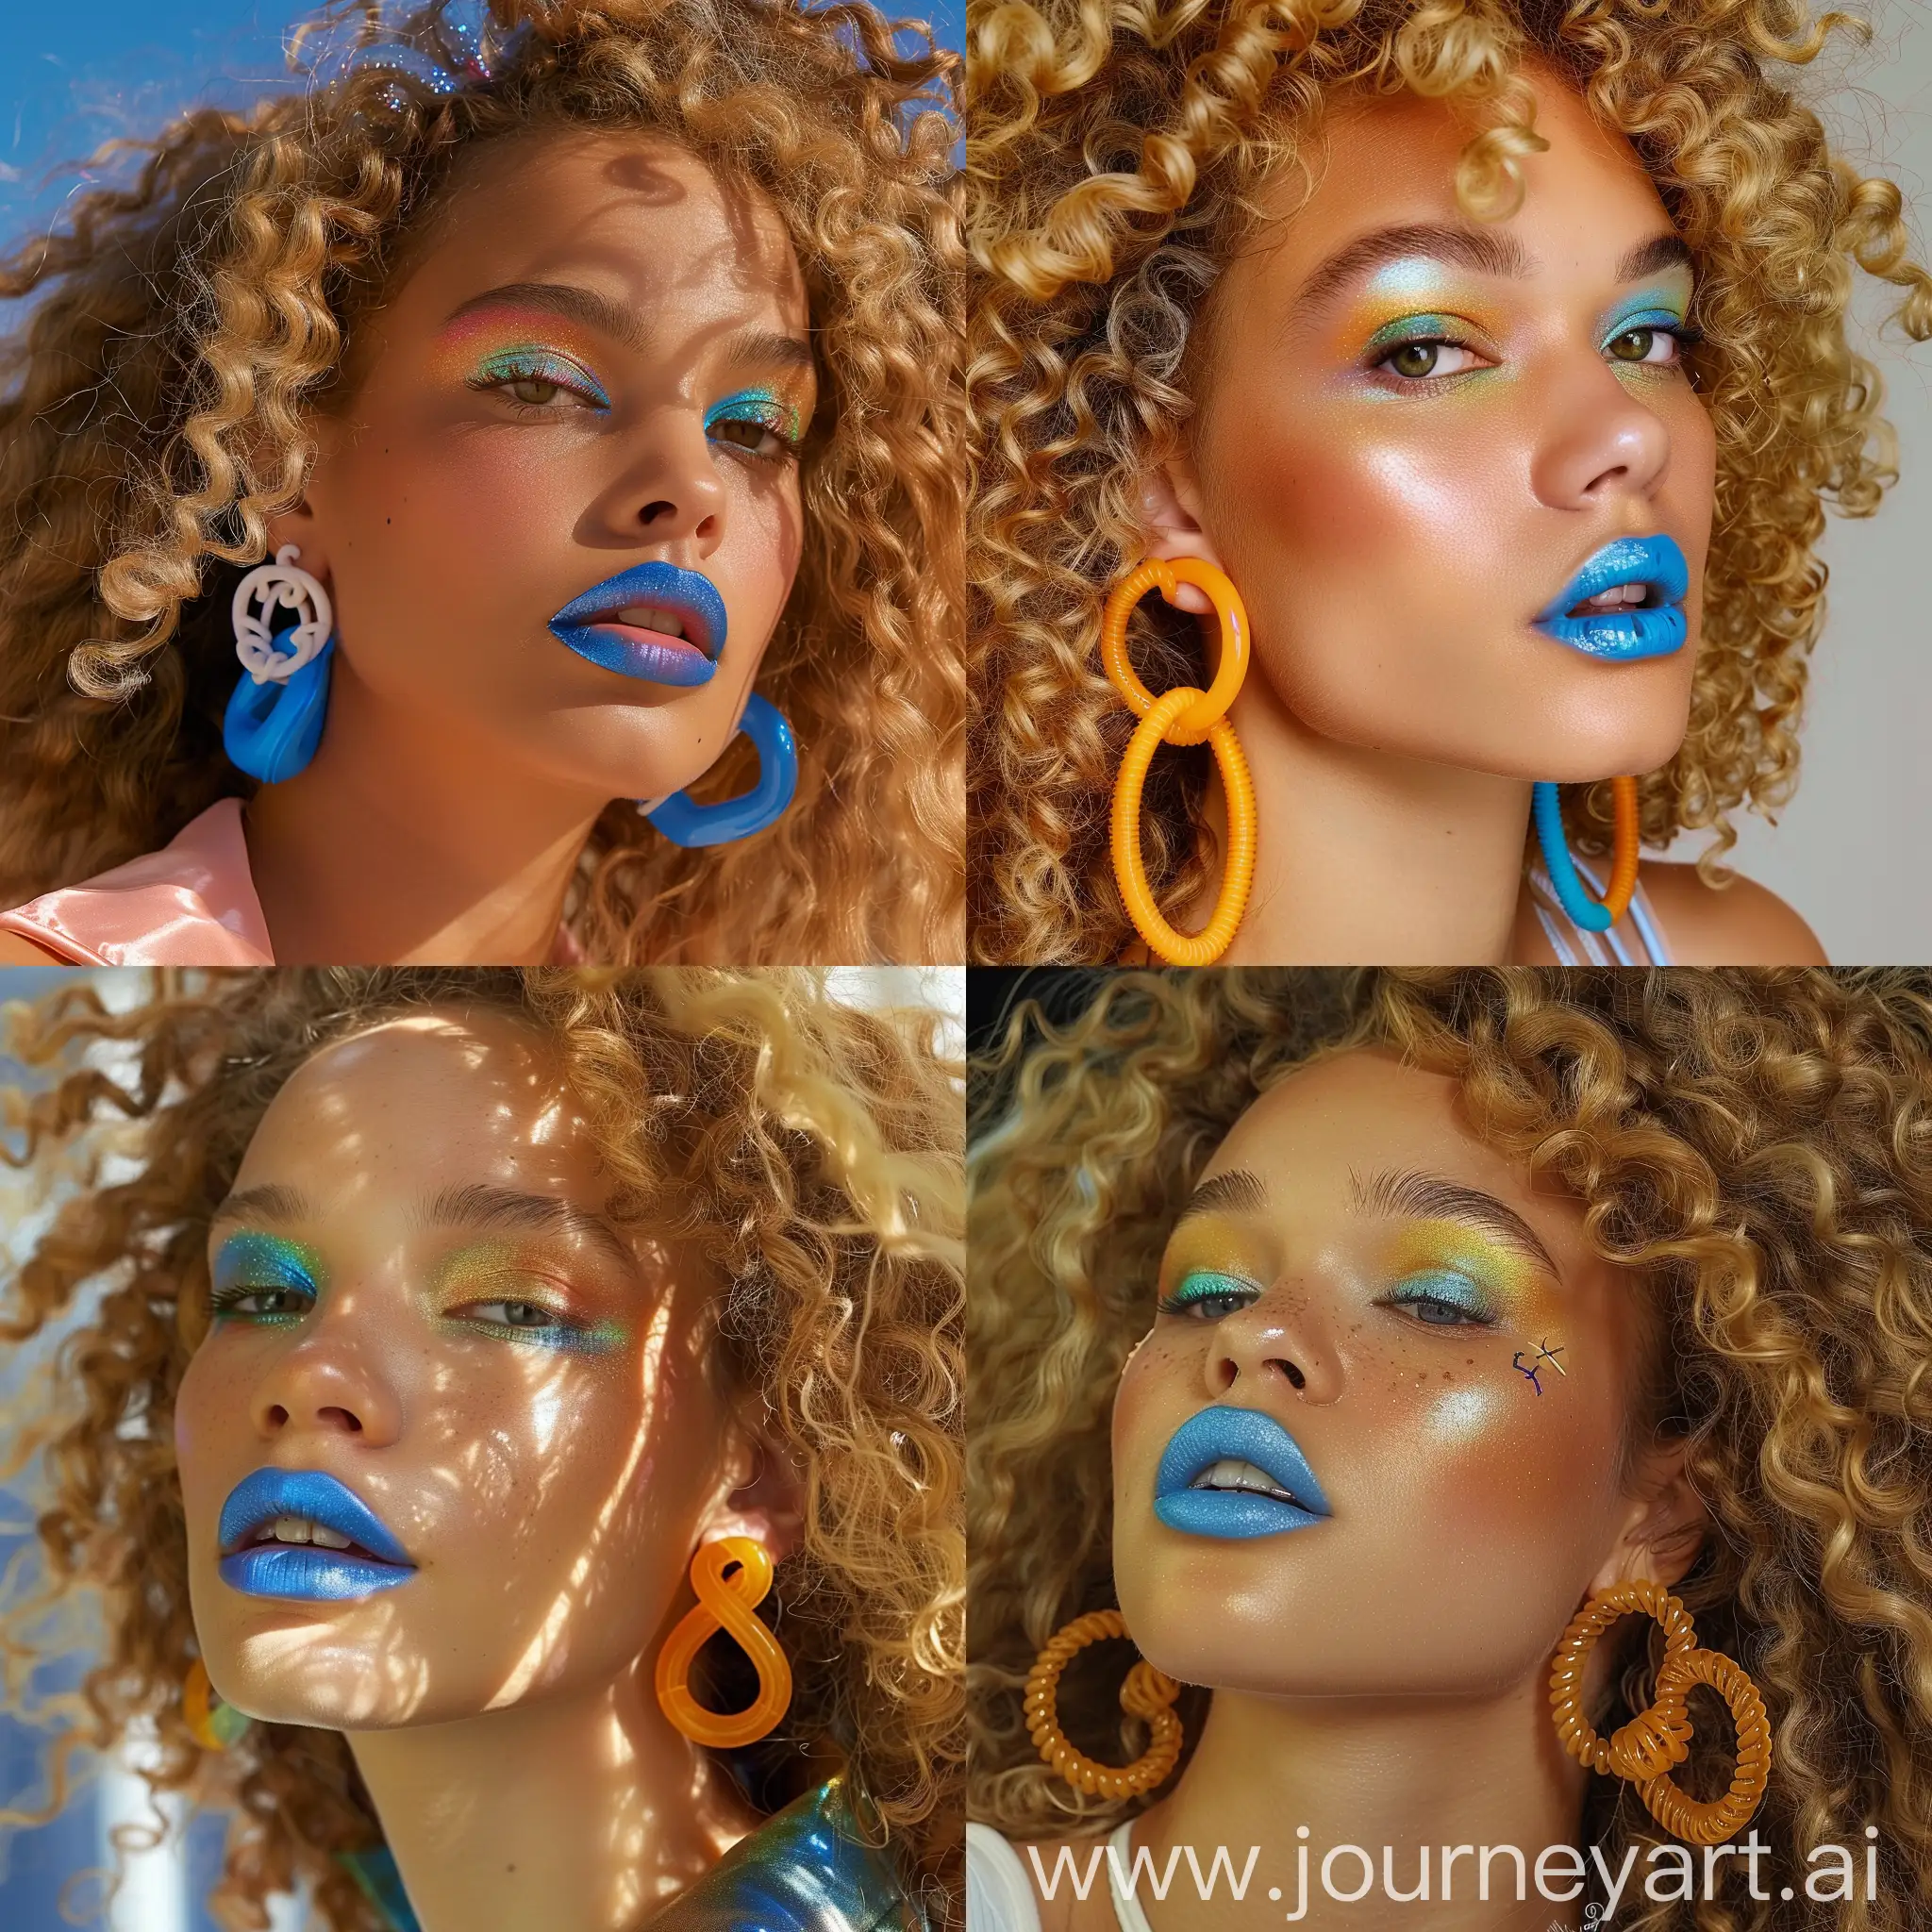 Fashion-Model-with-Vibrant-Curly-Blonde-Hair-and-Electric-Blue-Lipstick